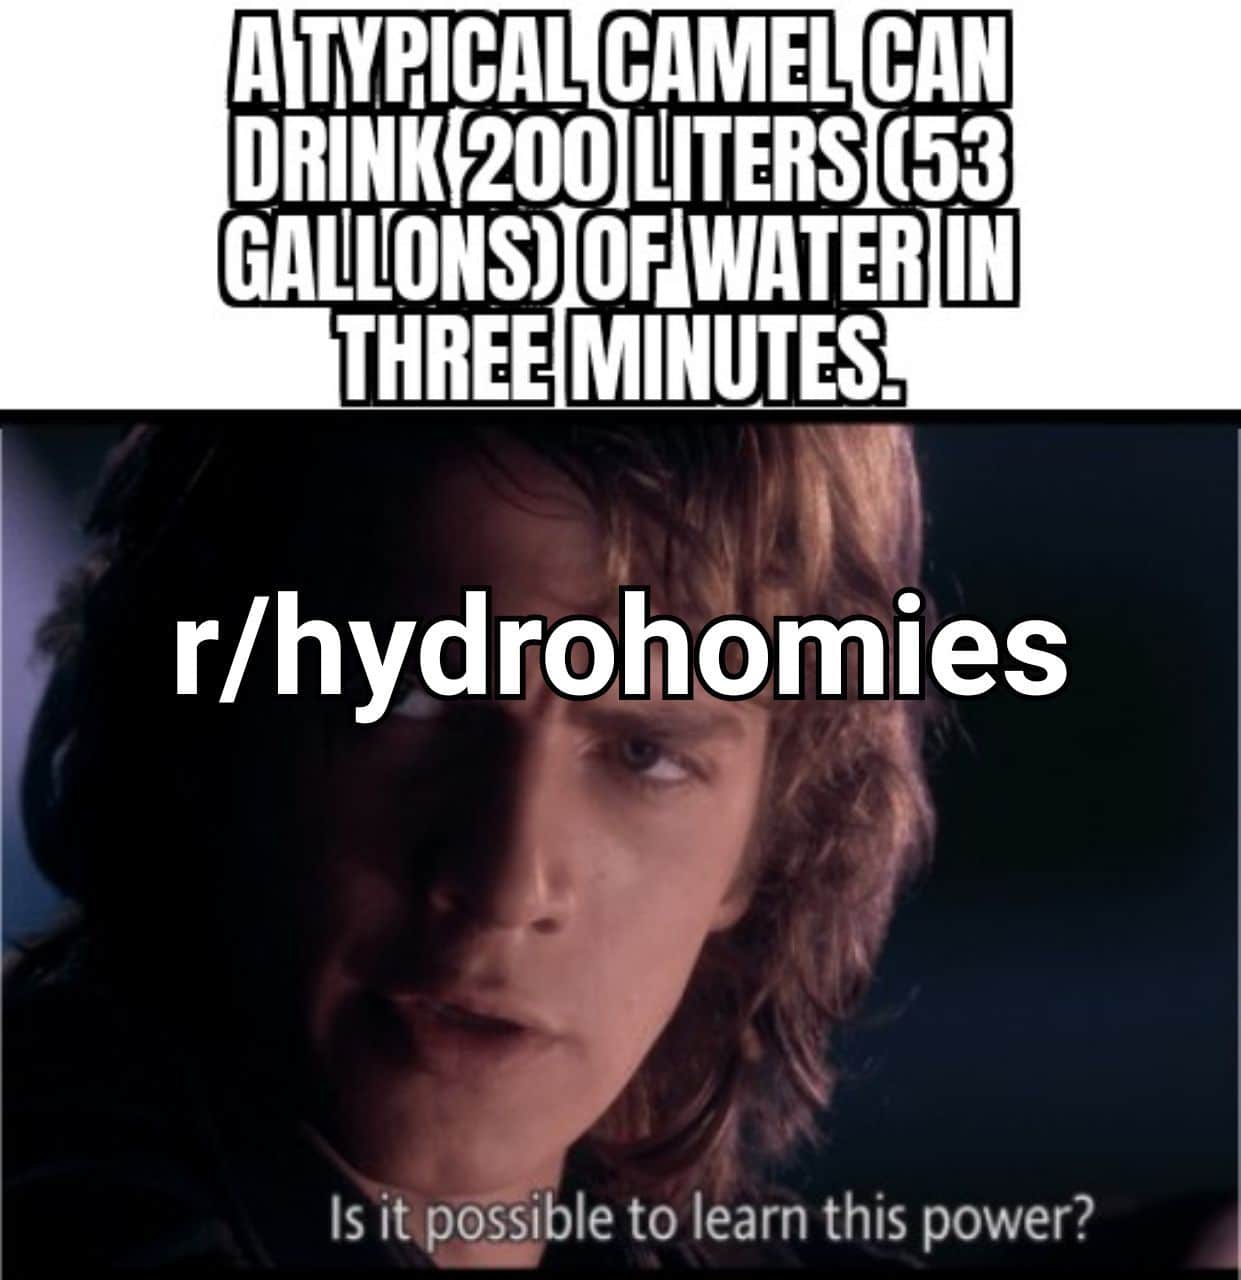 Water, Camels Water Memes Water, Camels text: A TiYRlCAL CAMEL CAN LIITERS (53 GALIL[ONS) ONWATER IN THREE MINUTES. r/hydrobomies Is it possible to learn this power? 